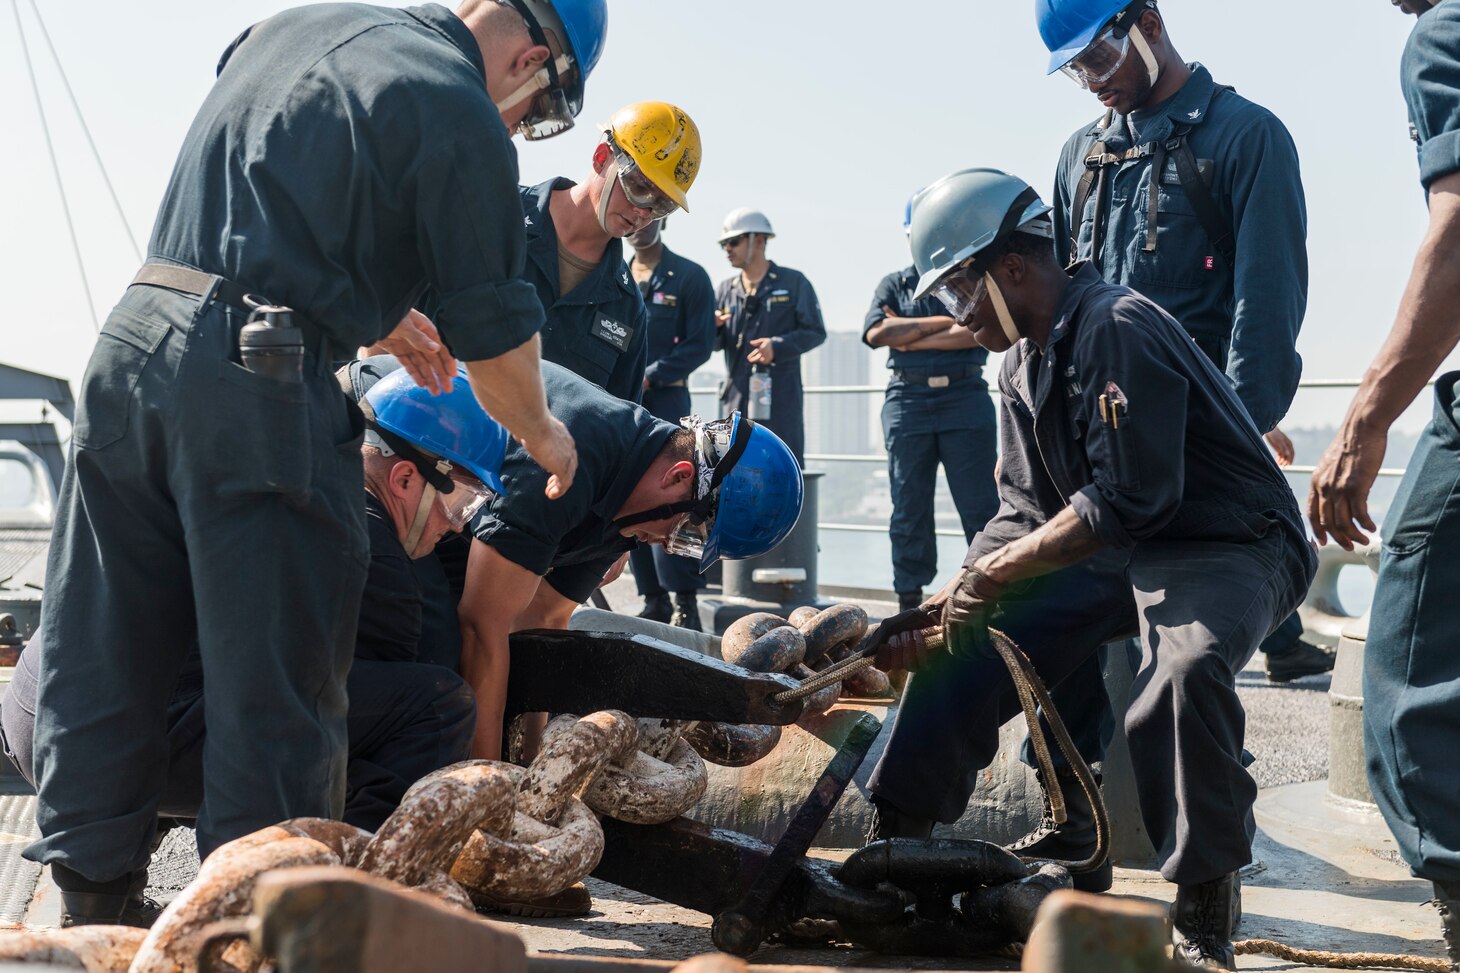 190223-N-WI365-1041 KOTA KINABALU, Malaysia (Feb. 23, 2019) – Deck department Sailors pass the stopper on the anchor chain on the foc’s’le of the amphibious dock landing ship USS Ashland (LSD 48) during a sea and anchor evolution. Ashland, part of the Wasp Amphibious Ready Group, with embarked 31st Marine Expeditionary Unit, is operating in the Indo-Pacific region to enhance interoperability with partners and serve as a ready-response force for any type of contingency. (U.S. Navy photo by Mass Communication Specialist 2nd Class Markus Castaneda)